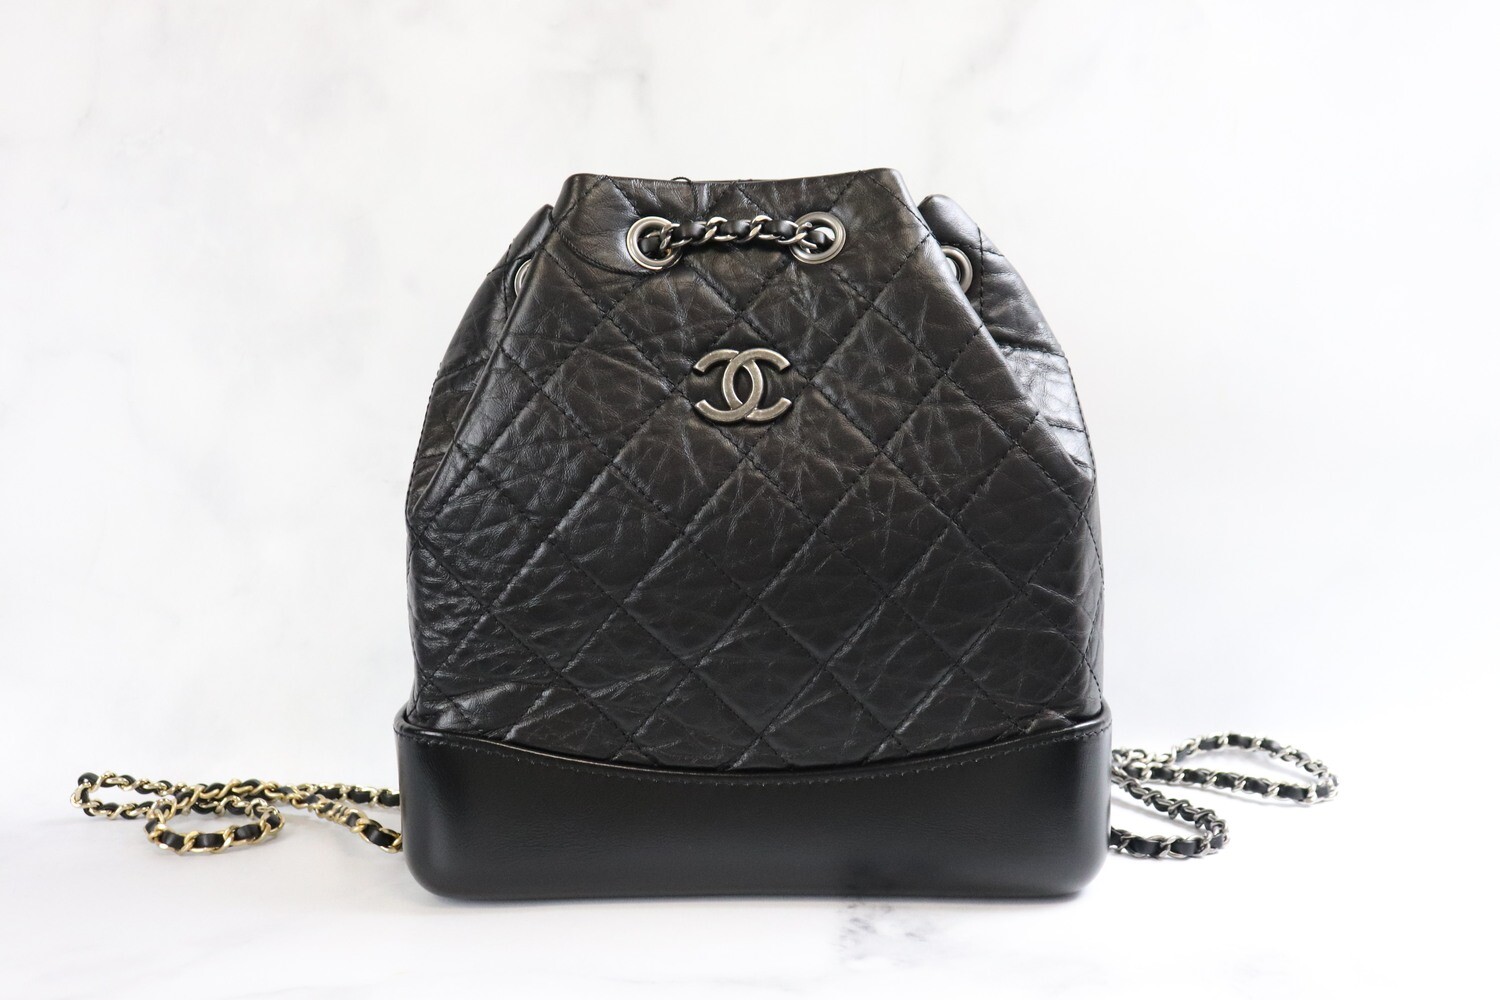 Chanel Gabrielle Backpack Small, Black Leather with Ruthenium Hardware, New in Box MA001